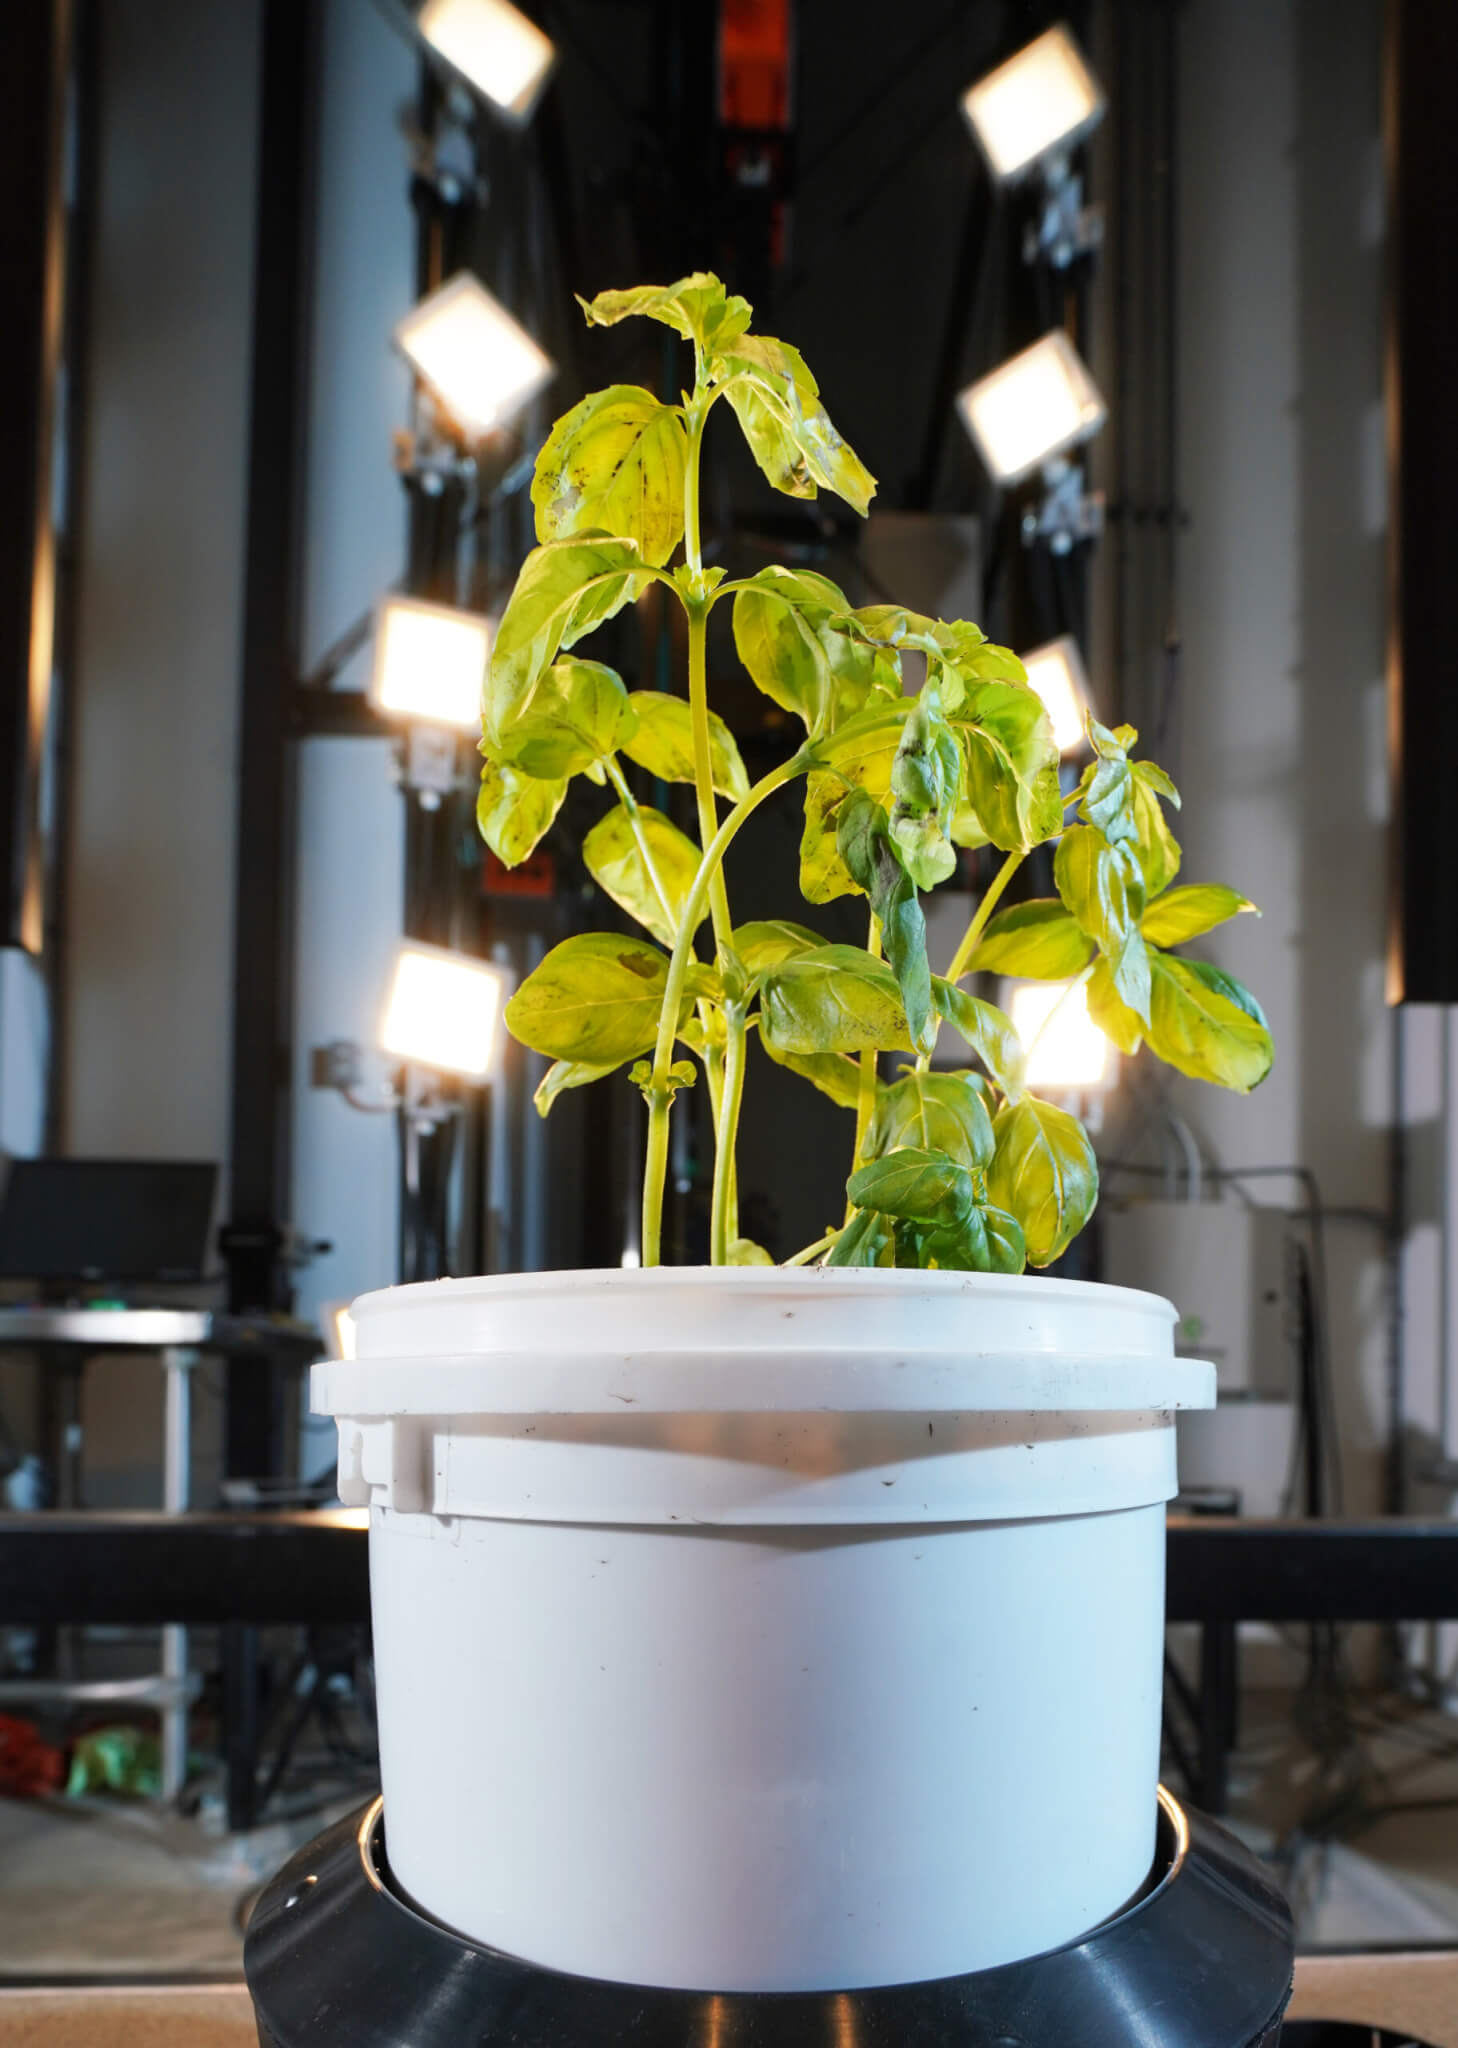 A basil plant takes a turn in the hyperspectral imaging tool at Purdue’s Ag Alumni Seed Phenotyping Facility. The technology is sensitive to changes within plants that are not detectable to the human eye. (Purdue University photo/Tom Campbell)